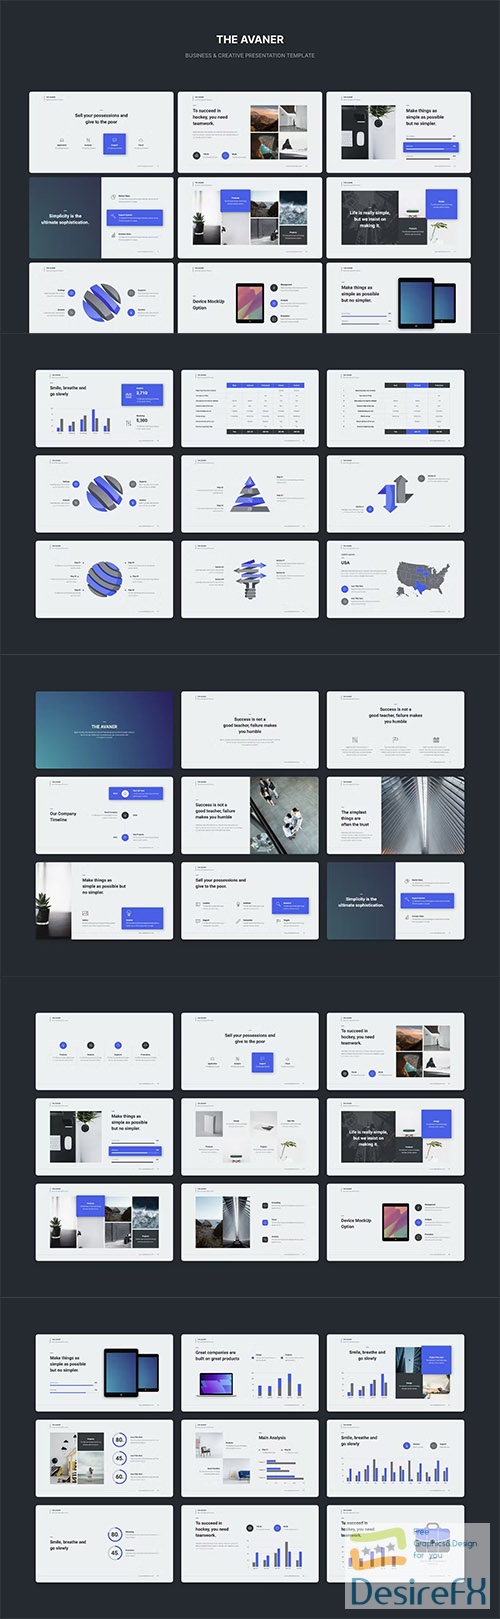 Avaner - Business Presentation Template (PPTX) and (KEY)